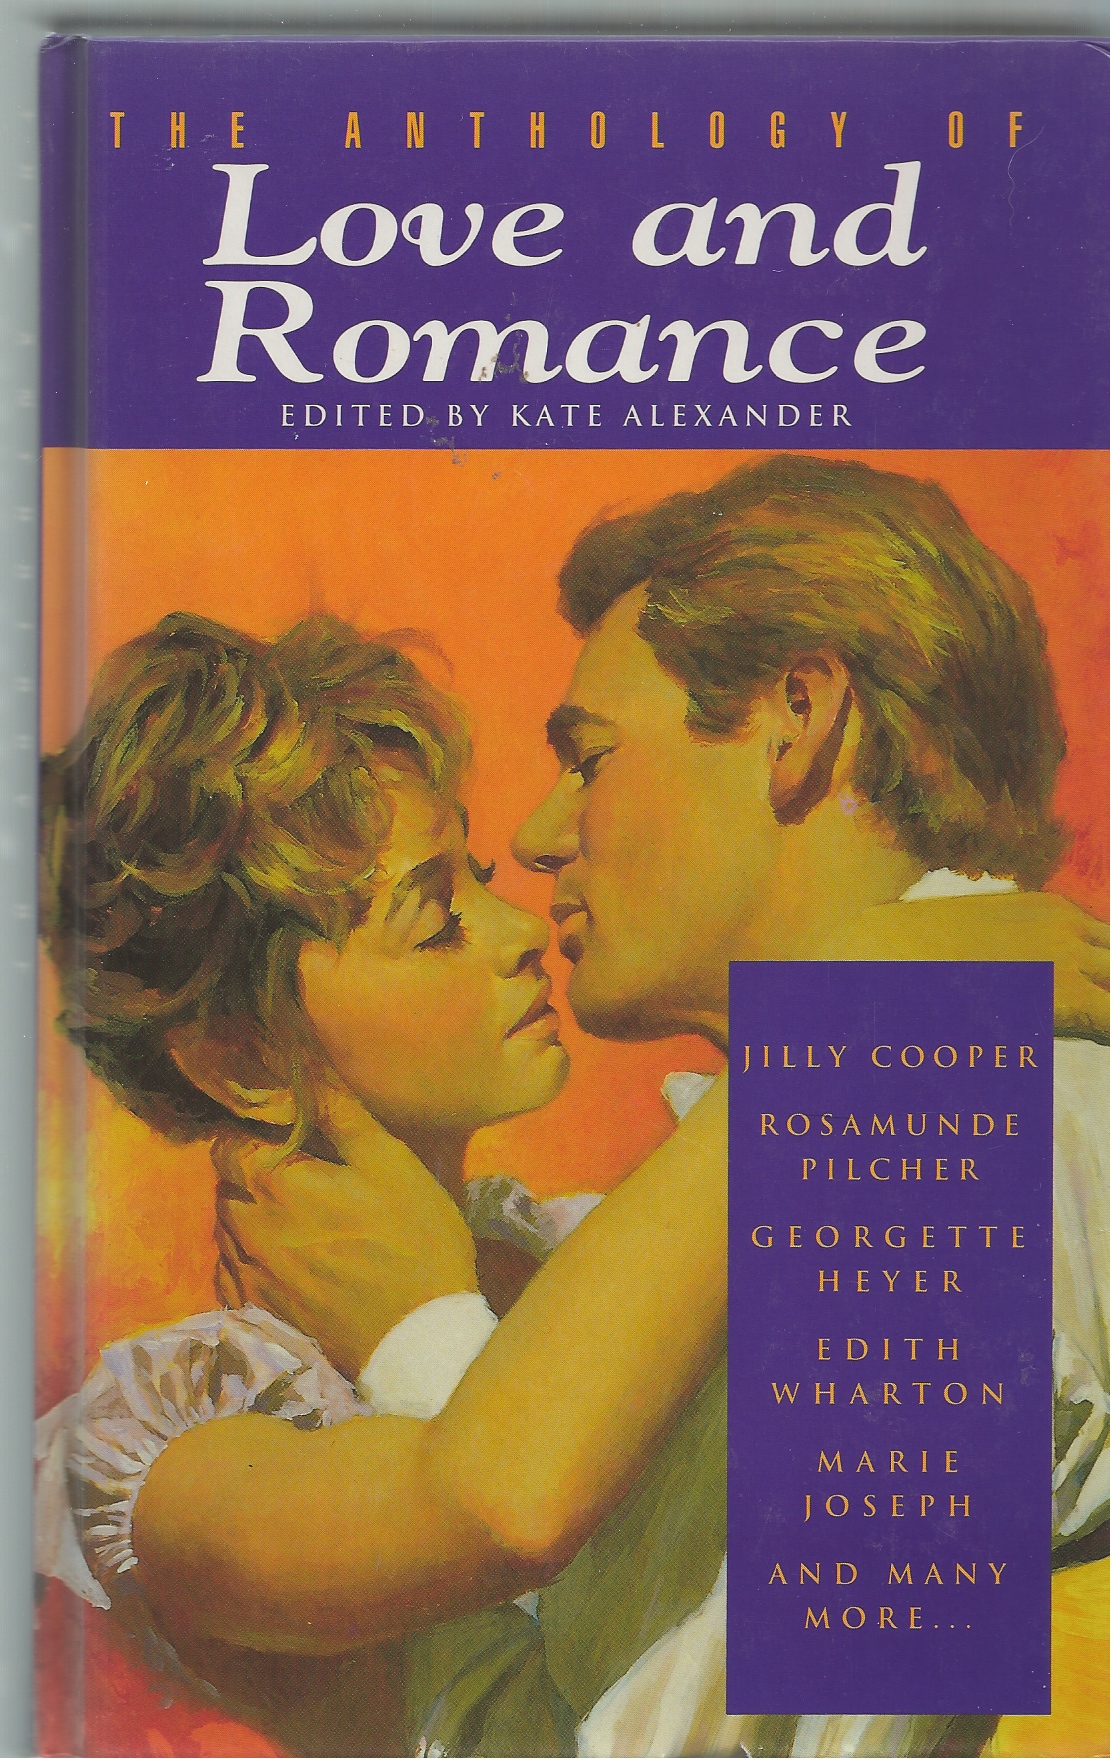 ALEXANDER KATE (EDITOR) - Anthology of Love and Romance, the